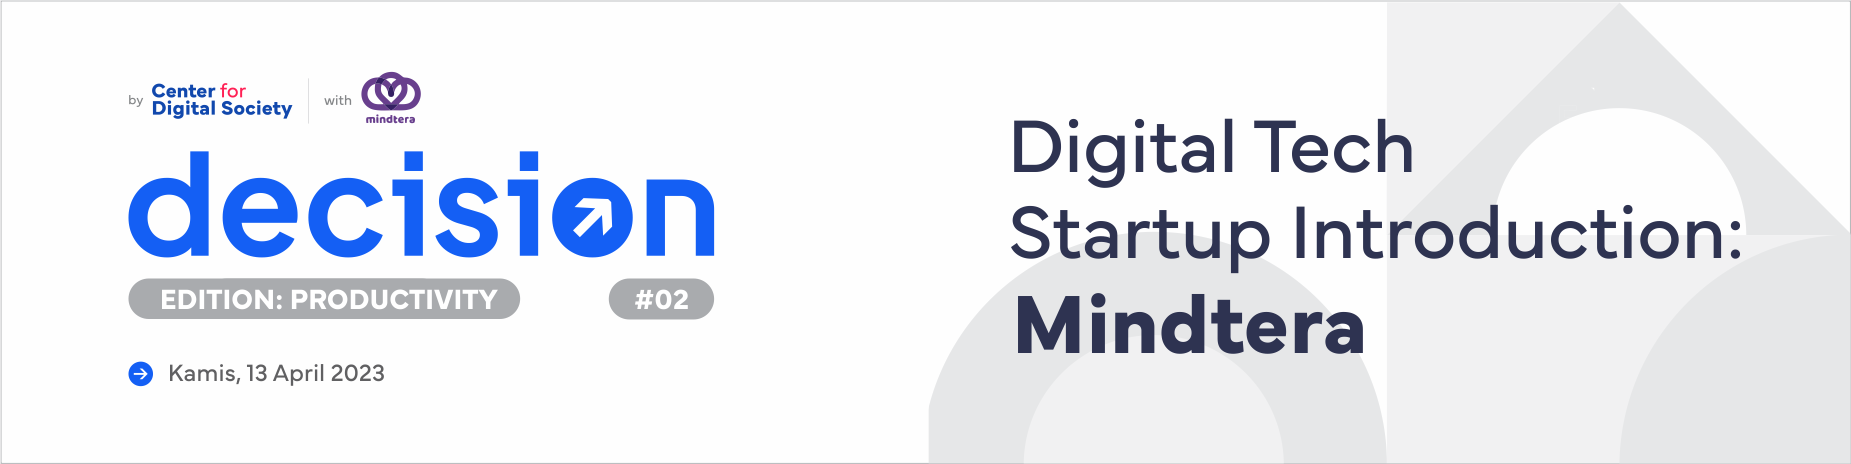 [PRESS RELEASE] MINDTERA: A SOLUTION TO SUSTAINABLE PRODUCTIVITY AND EMPLOYEE WELFARE | DECISION #2